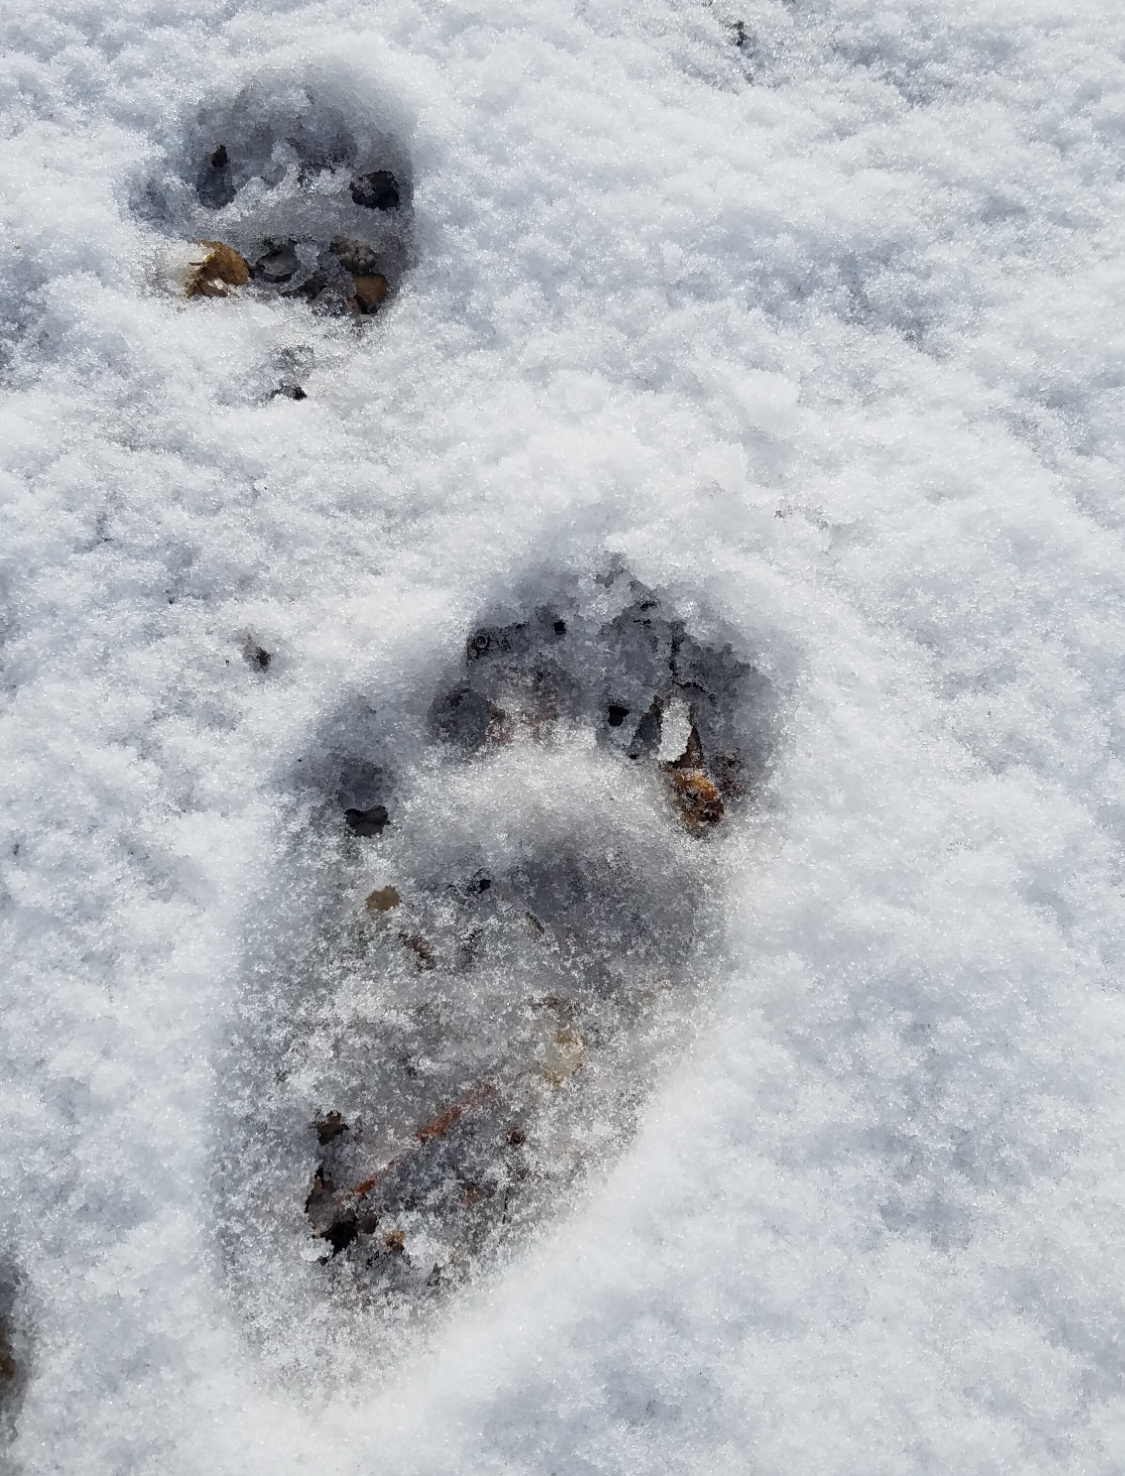 Old bear tracks have frost particles in them.